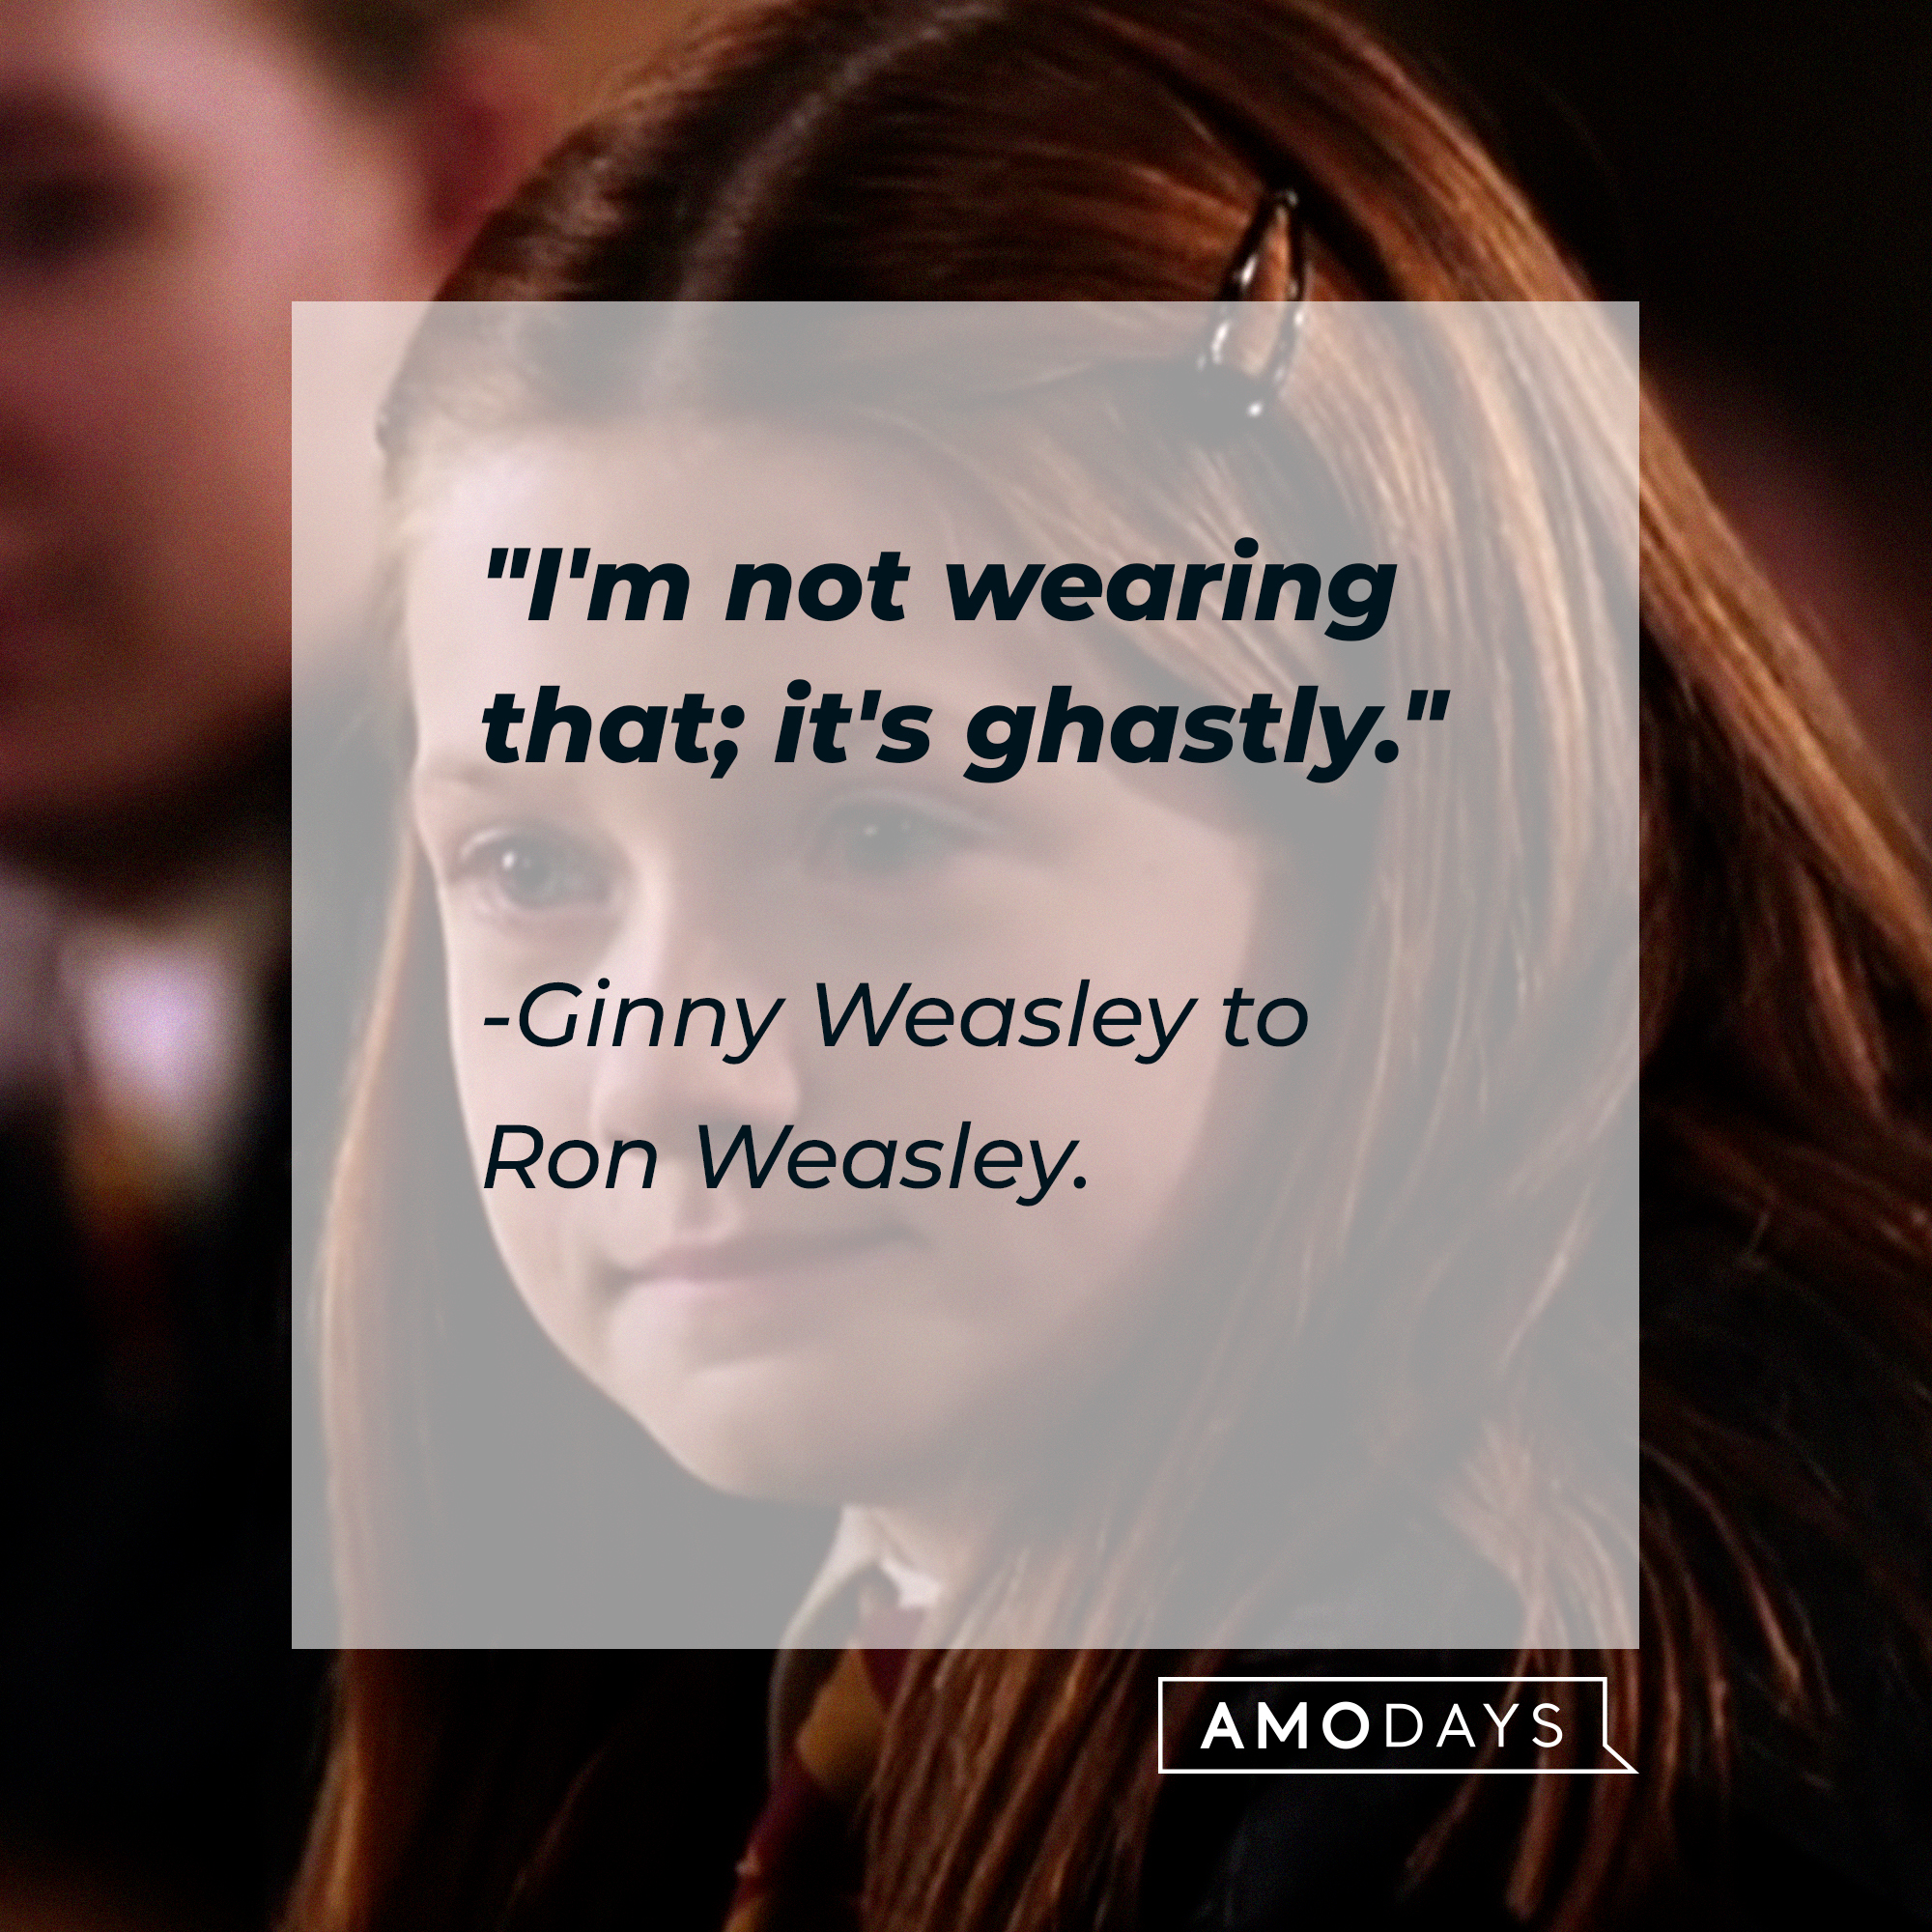 Ginny Weasley’s quote:  "I'm not wearing that; it's ghastly." | Image: Youtube.com/harrypotter